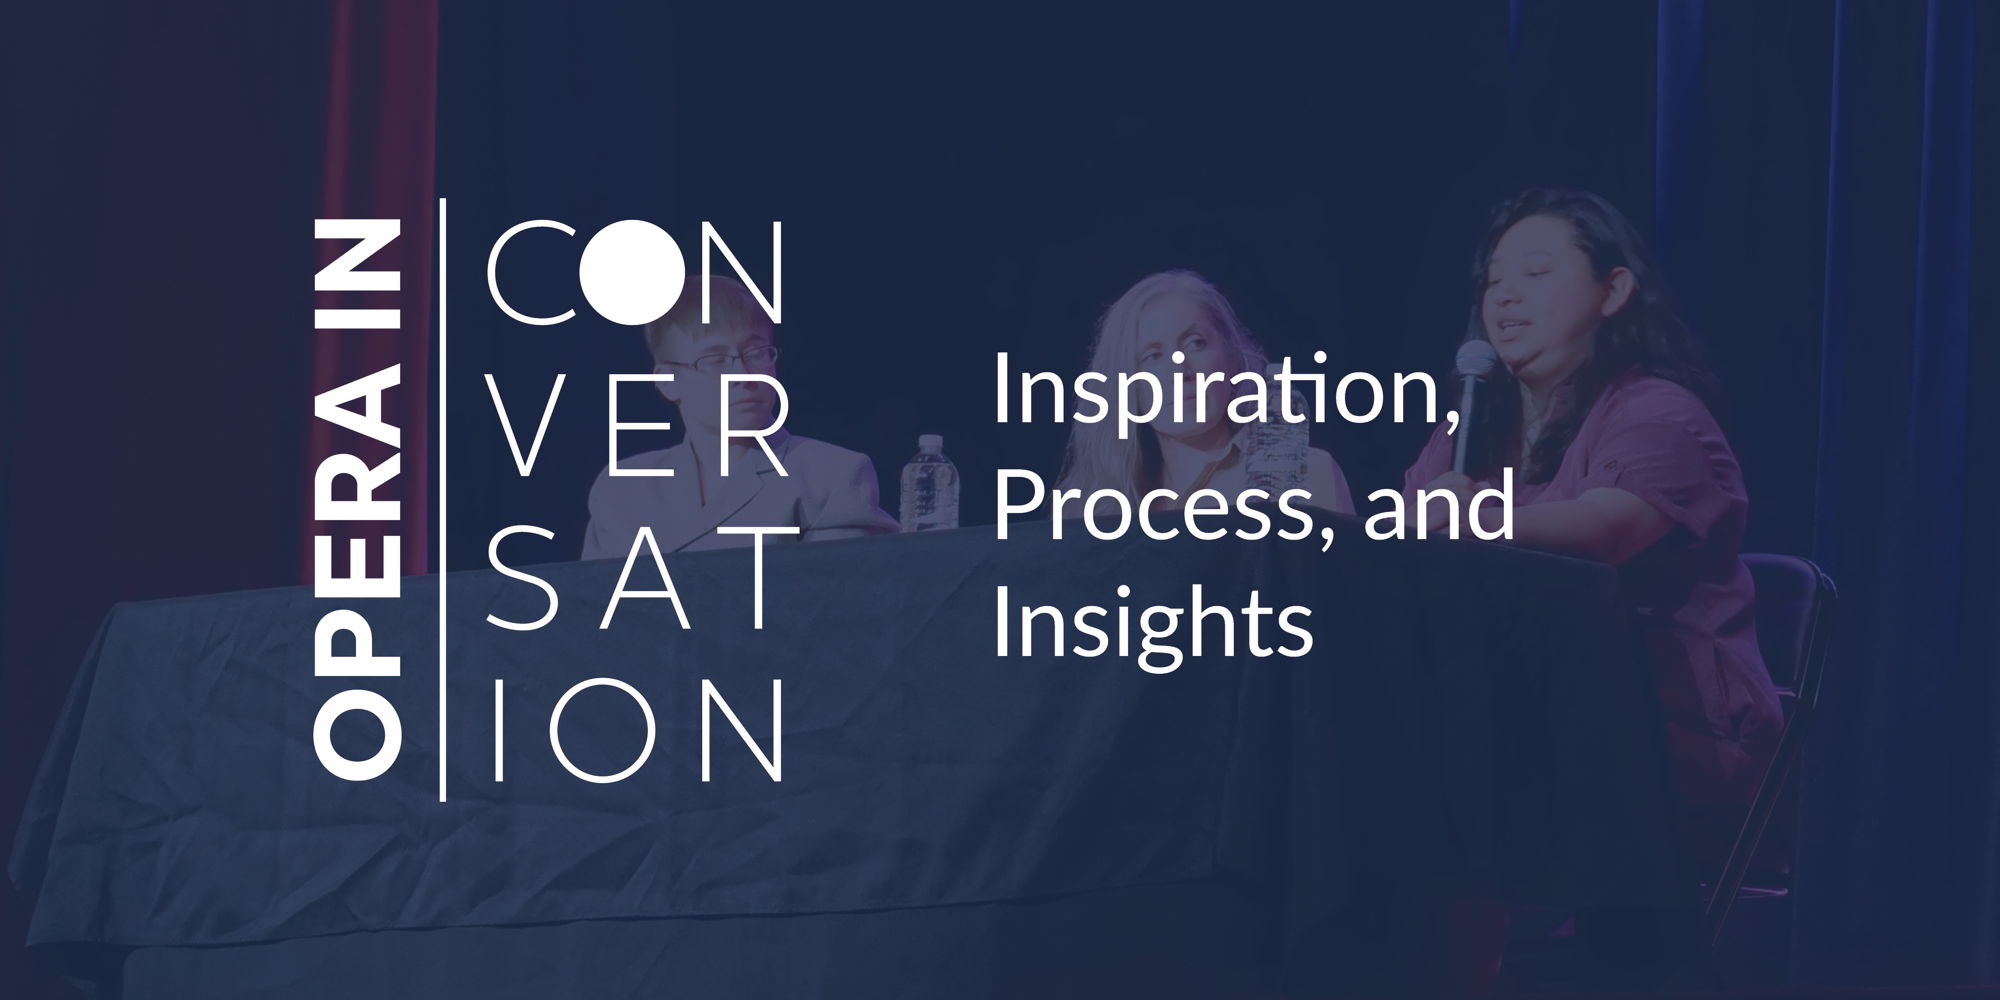 Opera in Conversation: Inspiration, Process and Insights promotional image